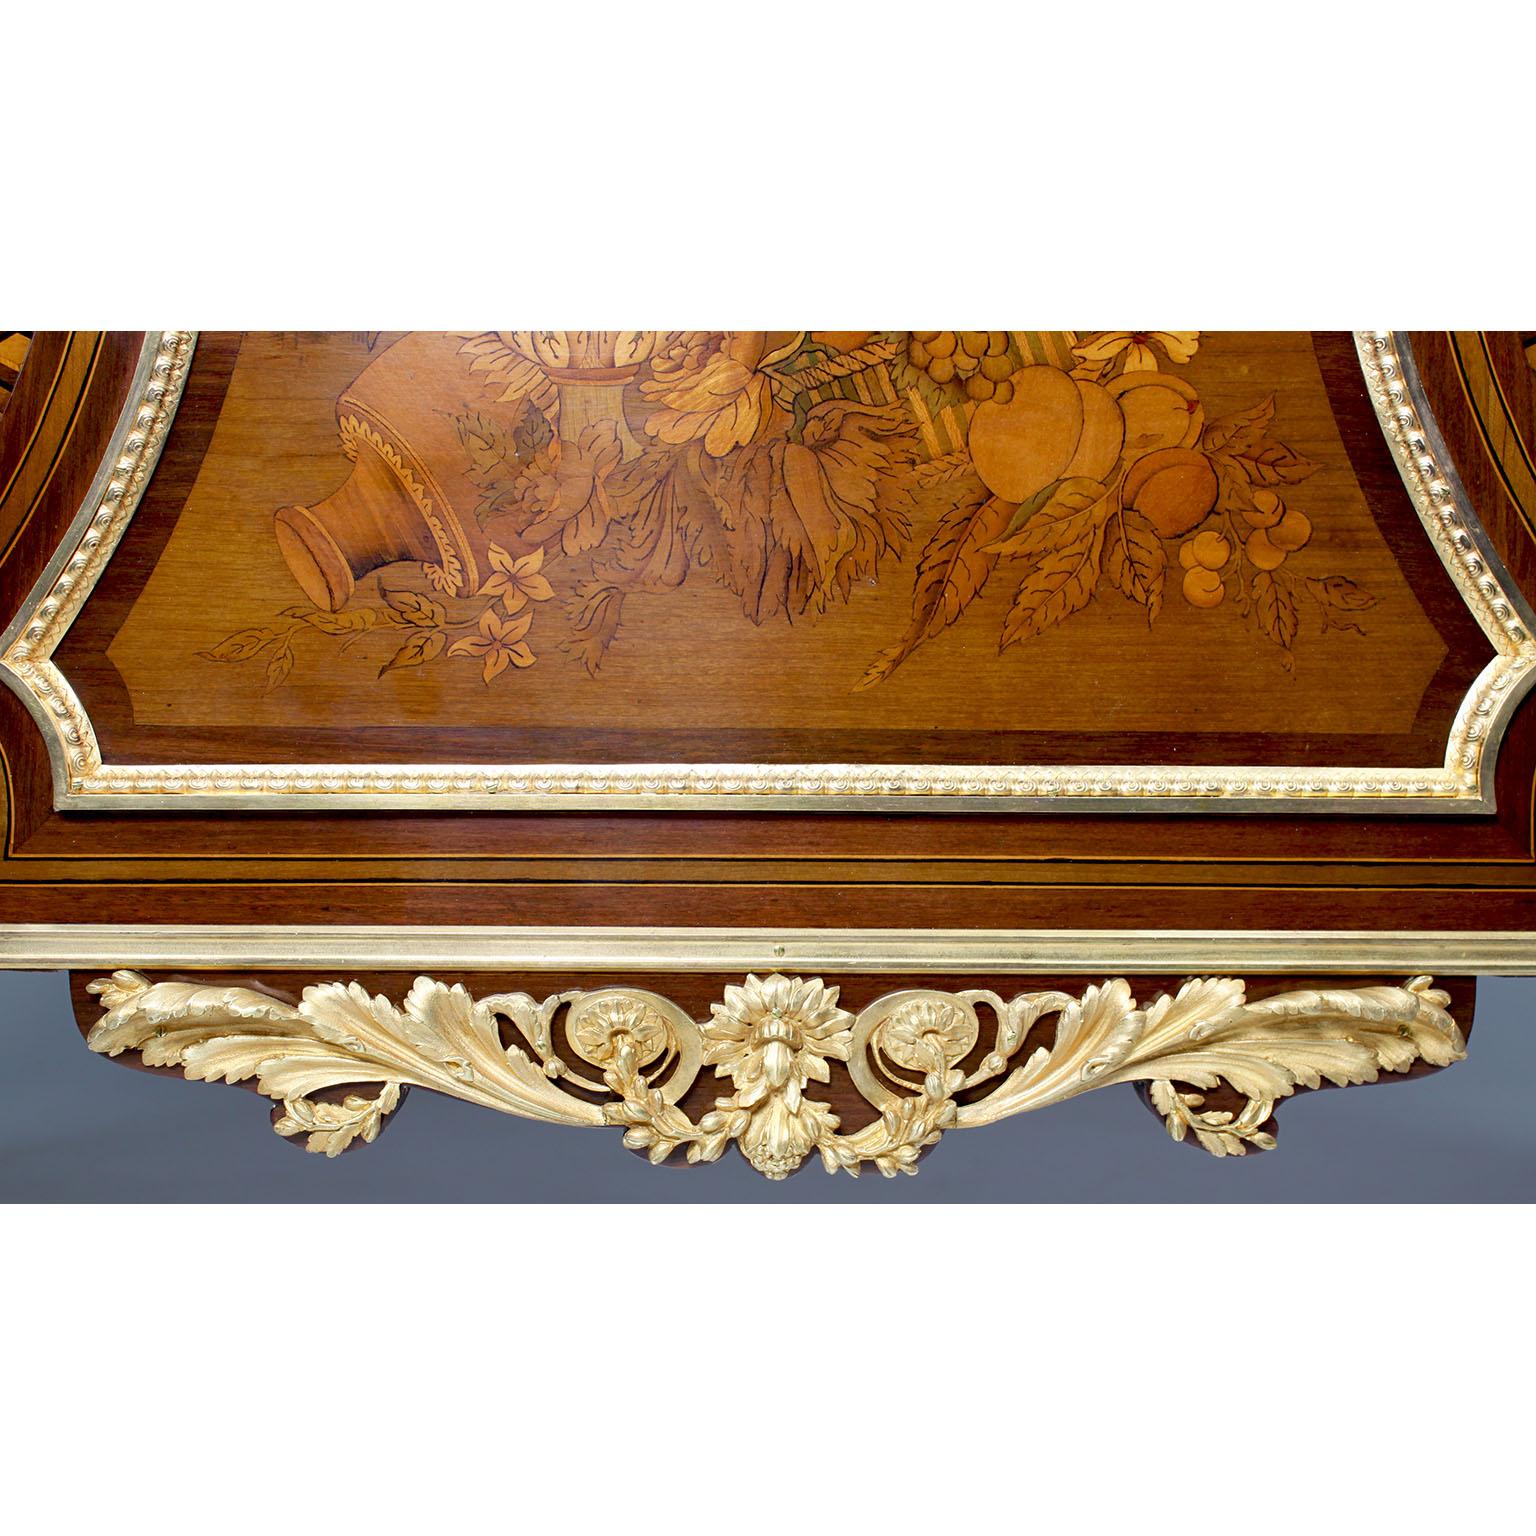 French 19th Century Louis XV-XVI Ormolu Mounted Marquetry Commode Marble Top For Sale 1